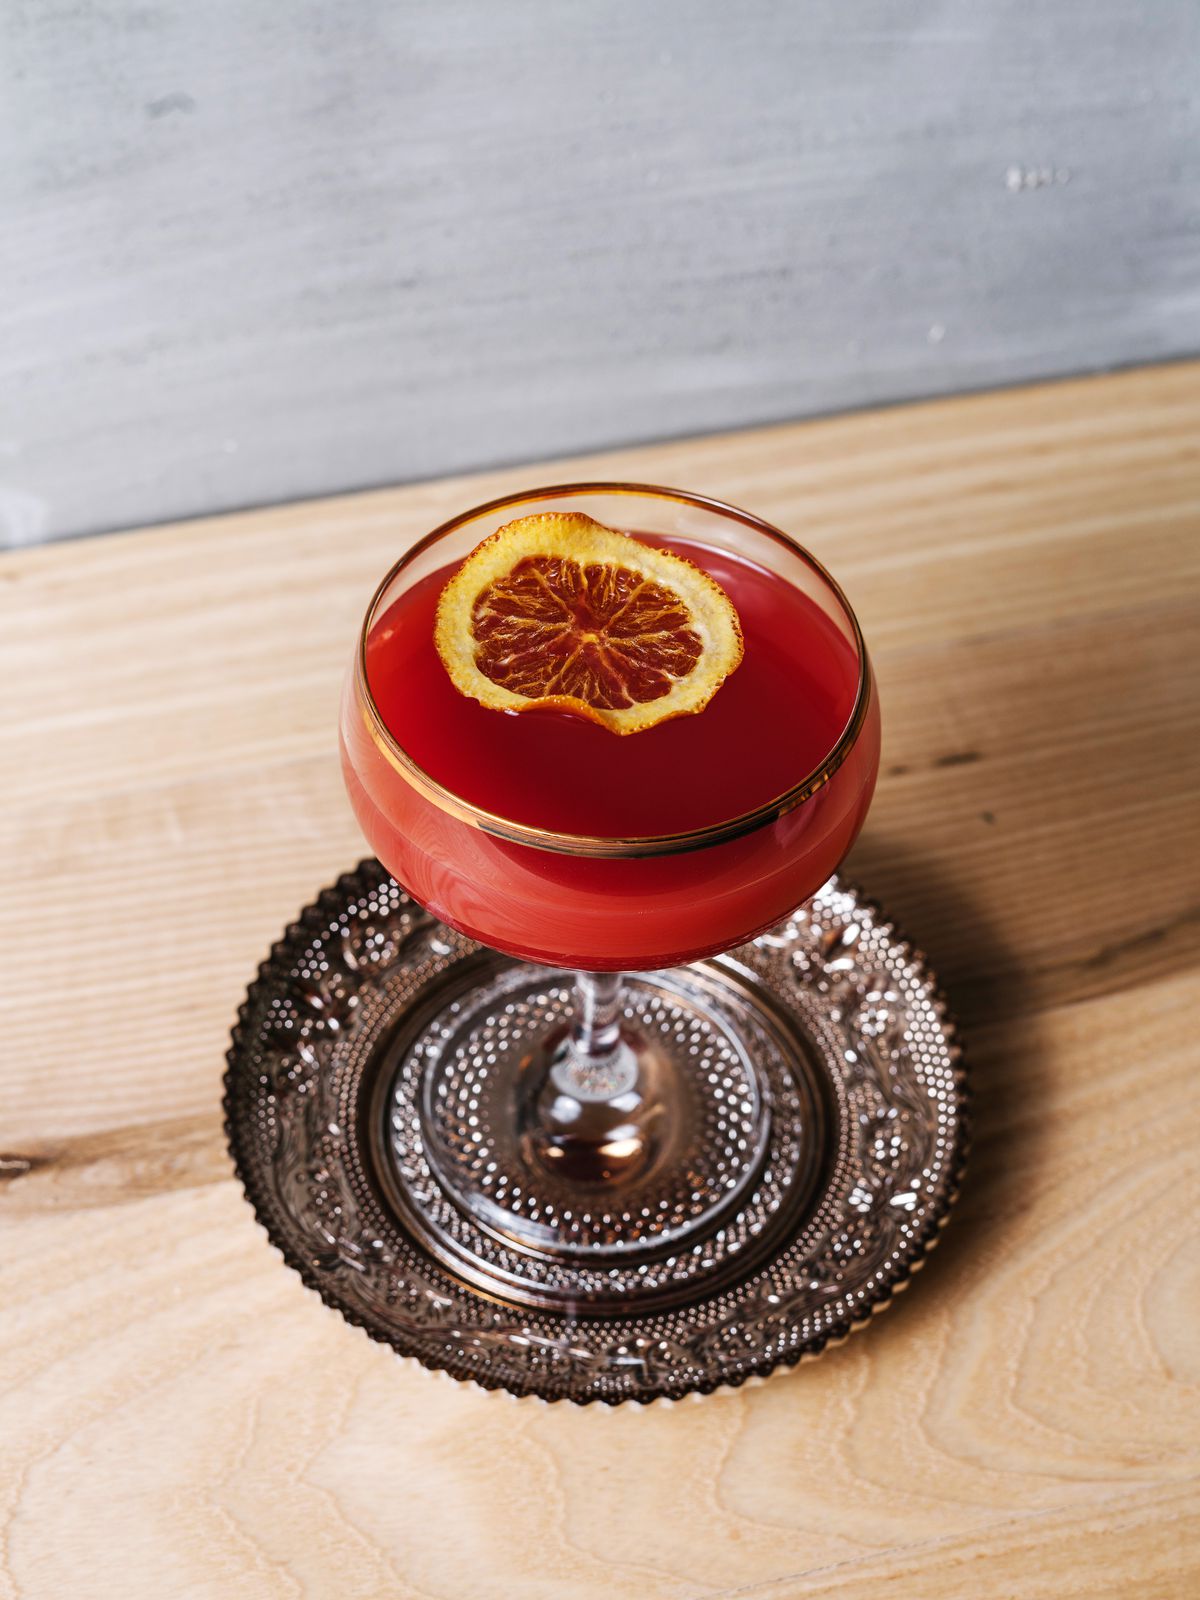 The Glyda Rose cocktail from P6